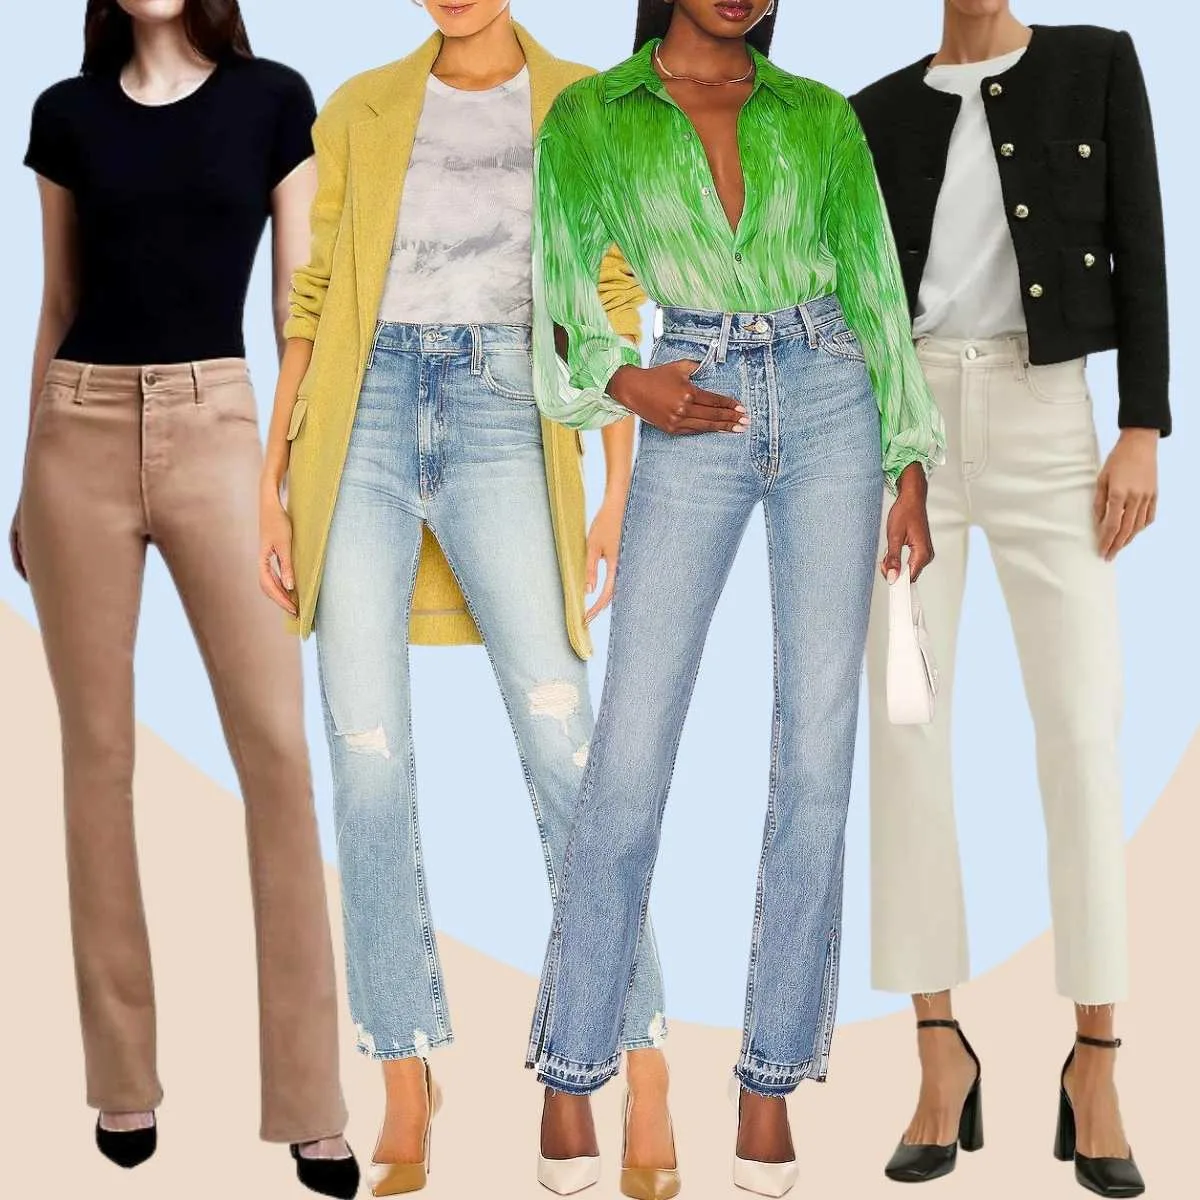 Collage of 4 women wearing pumps with bootcut jeans outfits.